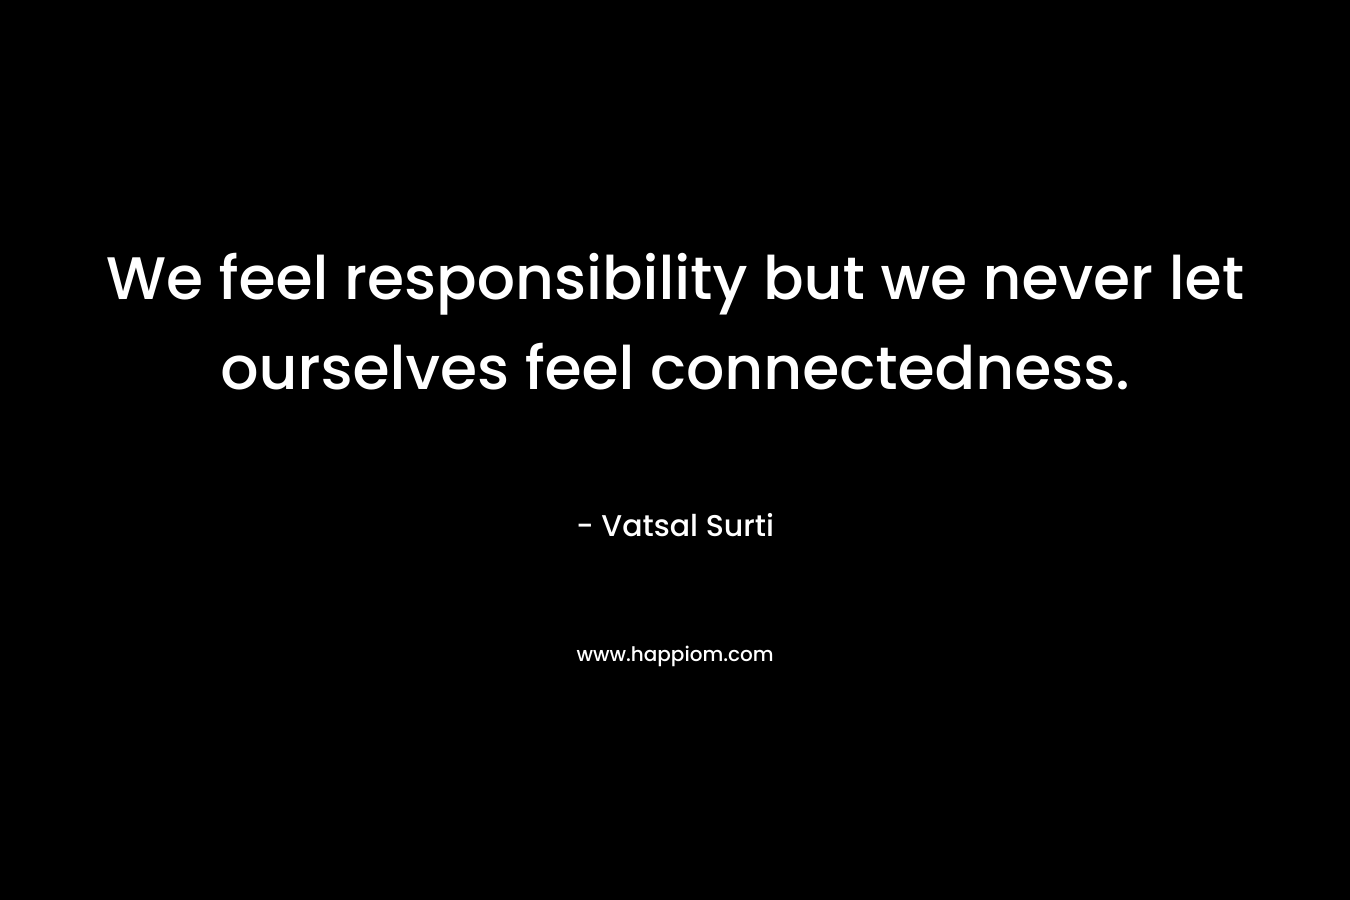 We feel responsibility but we never let ourselves feel connectedness.